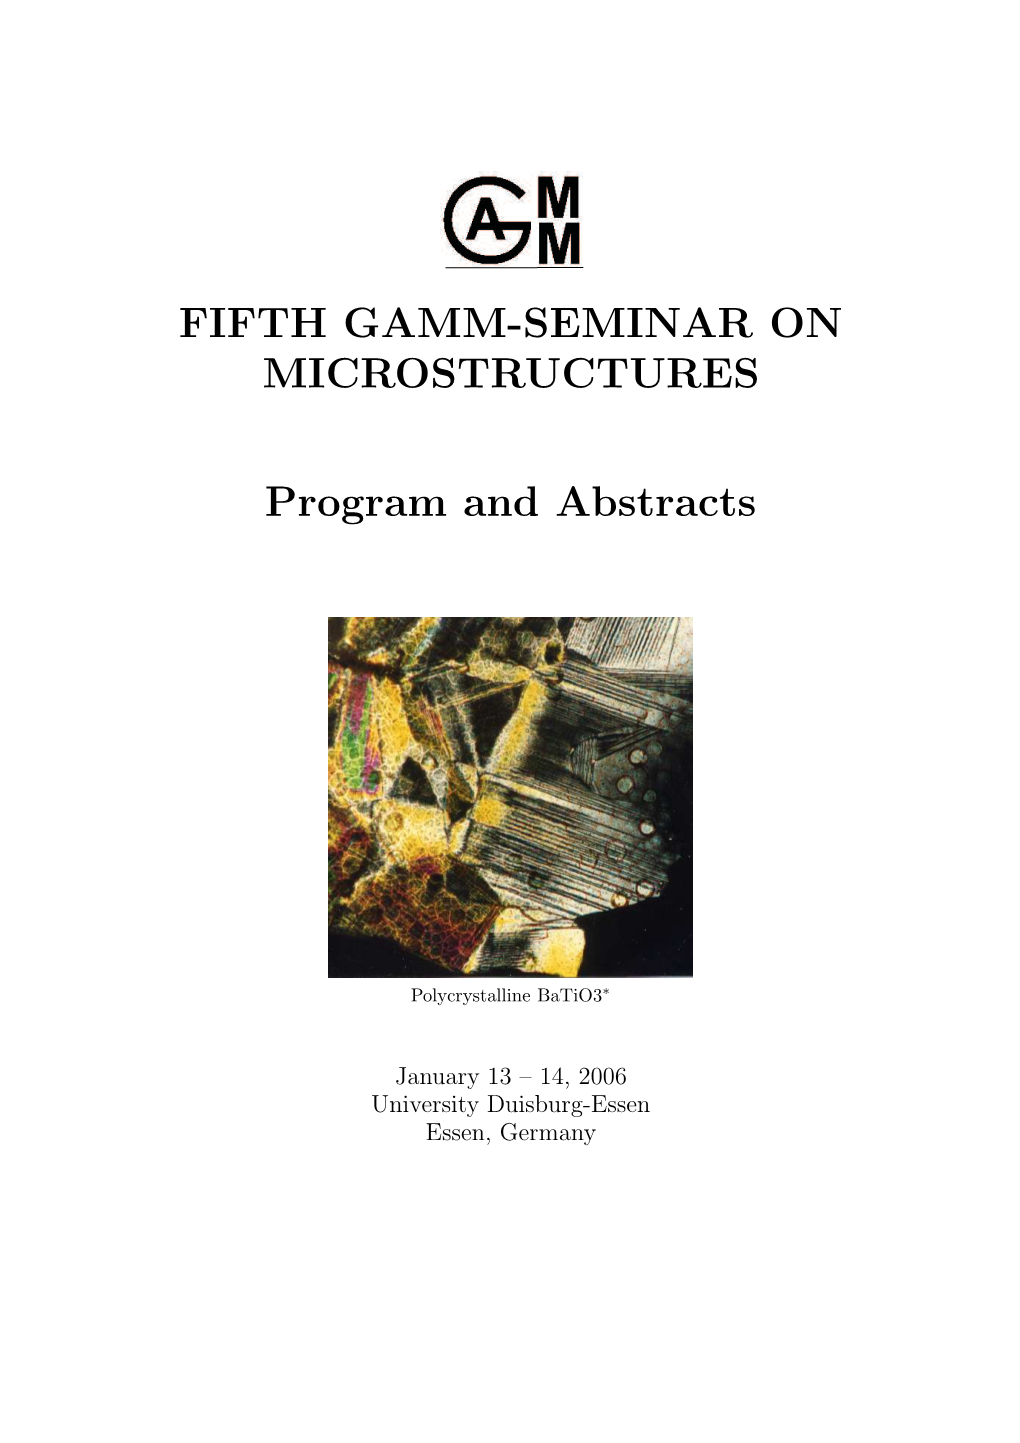 FIFTH GAMM-SEMINAR on MICROSTRUCTURES Program